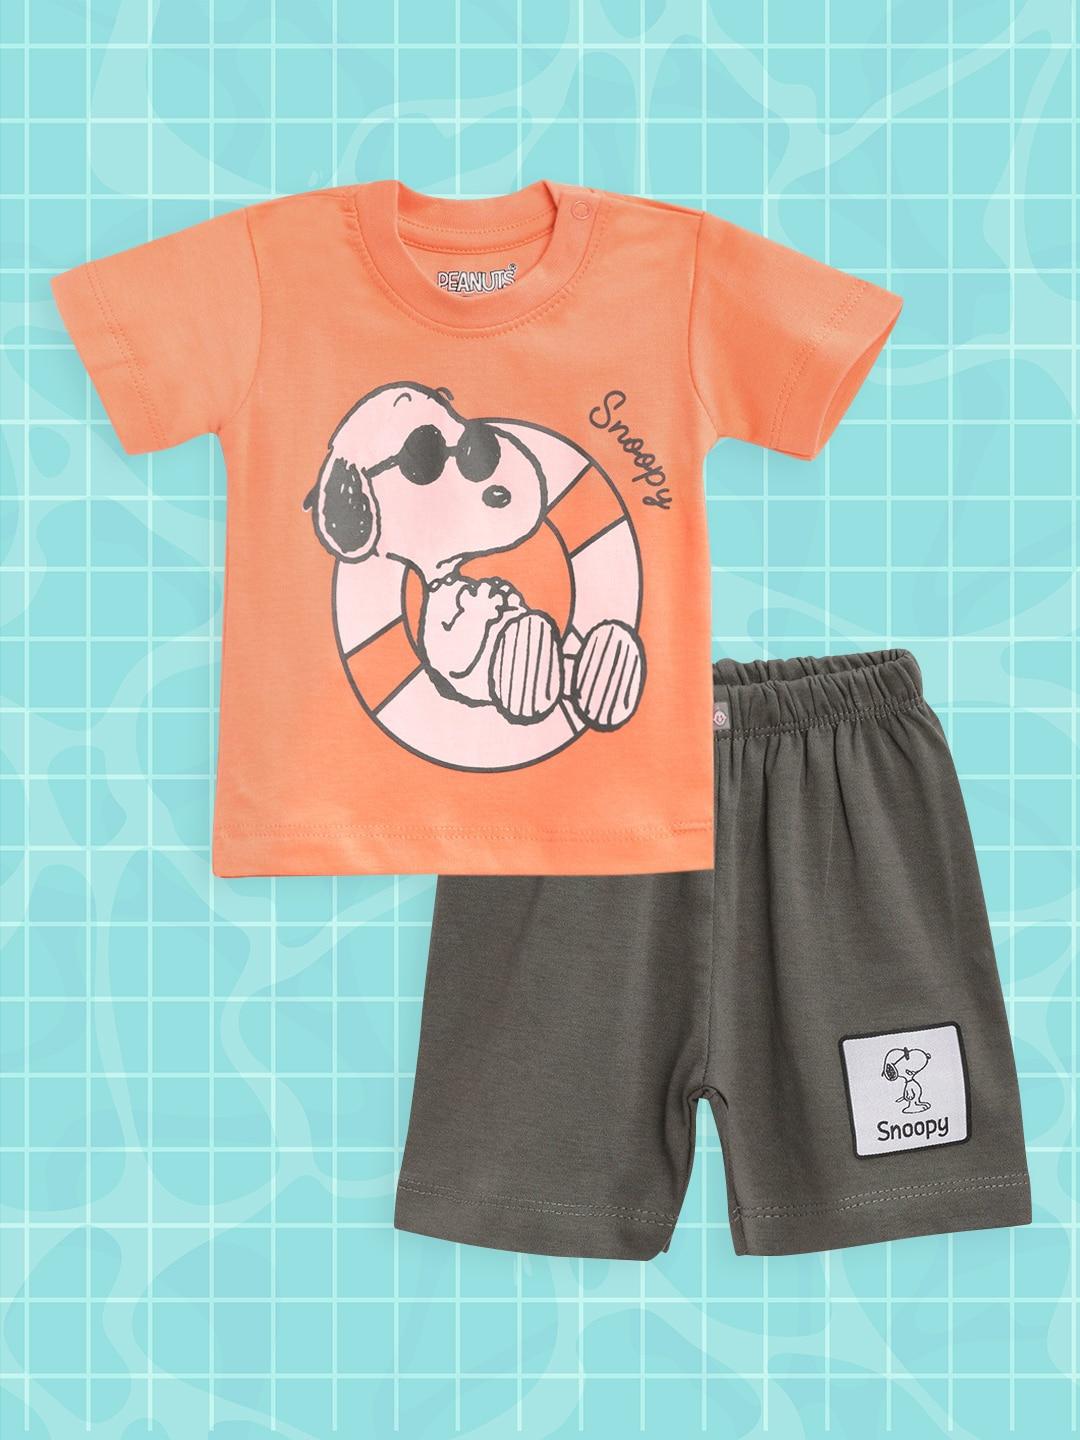 tinyo-infant-boys-coral-orange-&-charcoal-grey-pure-cotton-snoopy-t-shirt-with-shorts